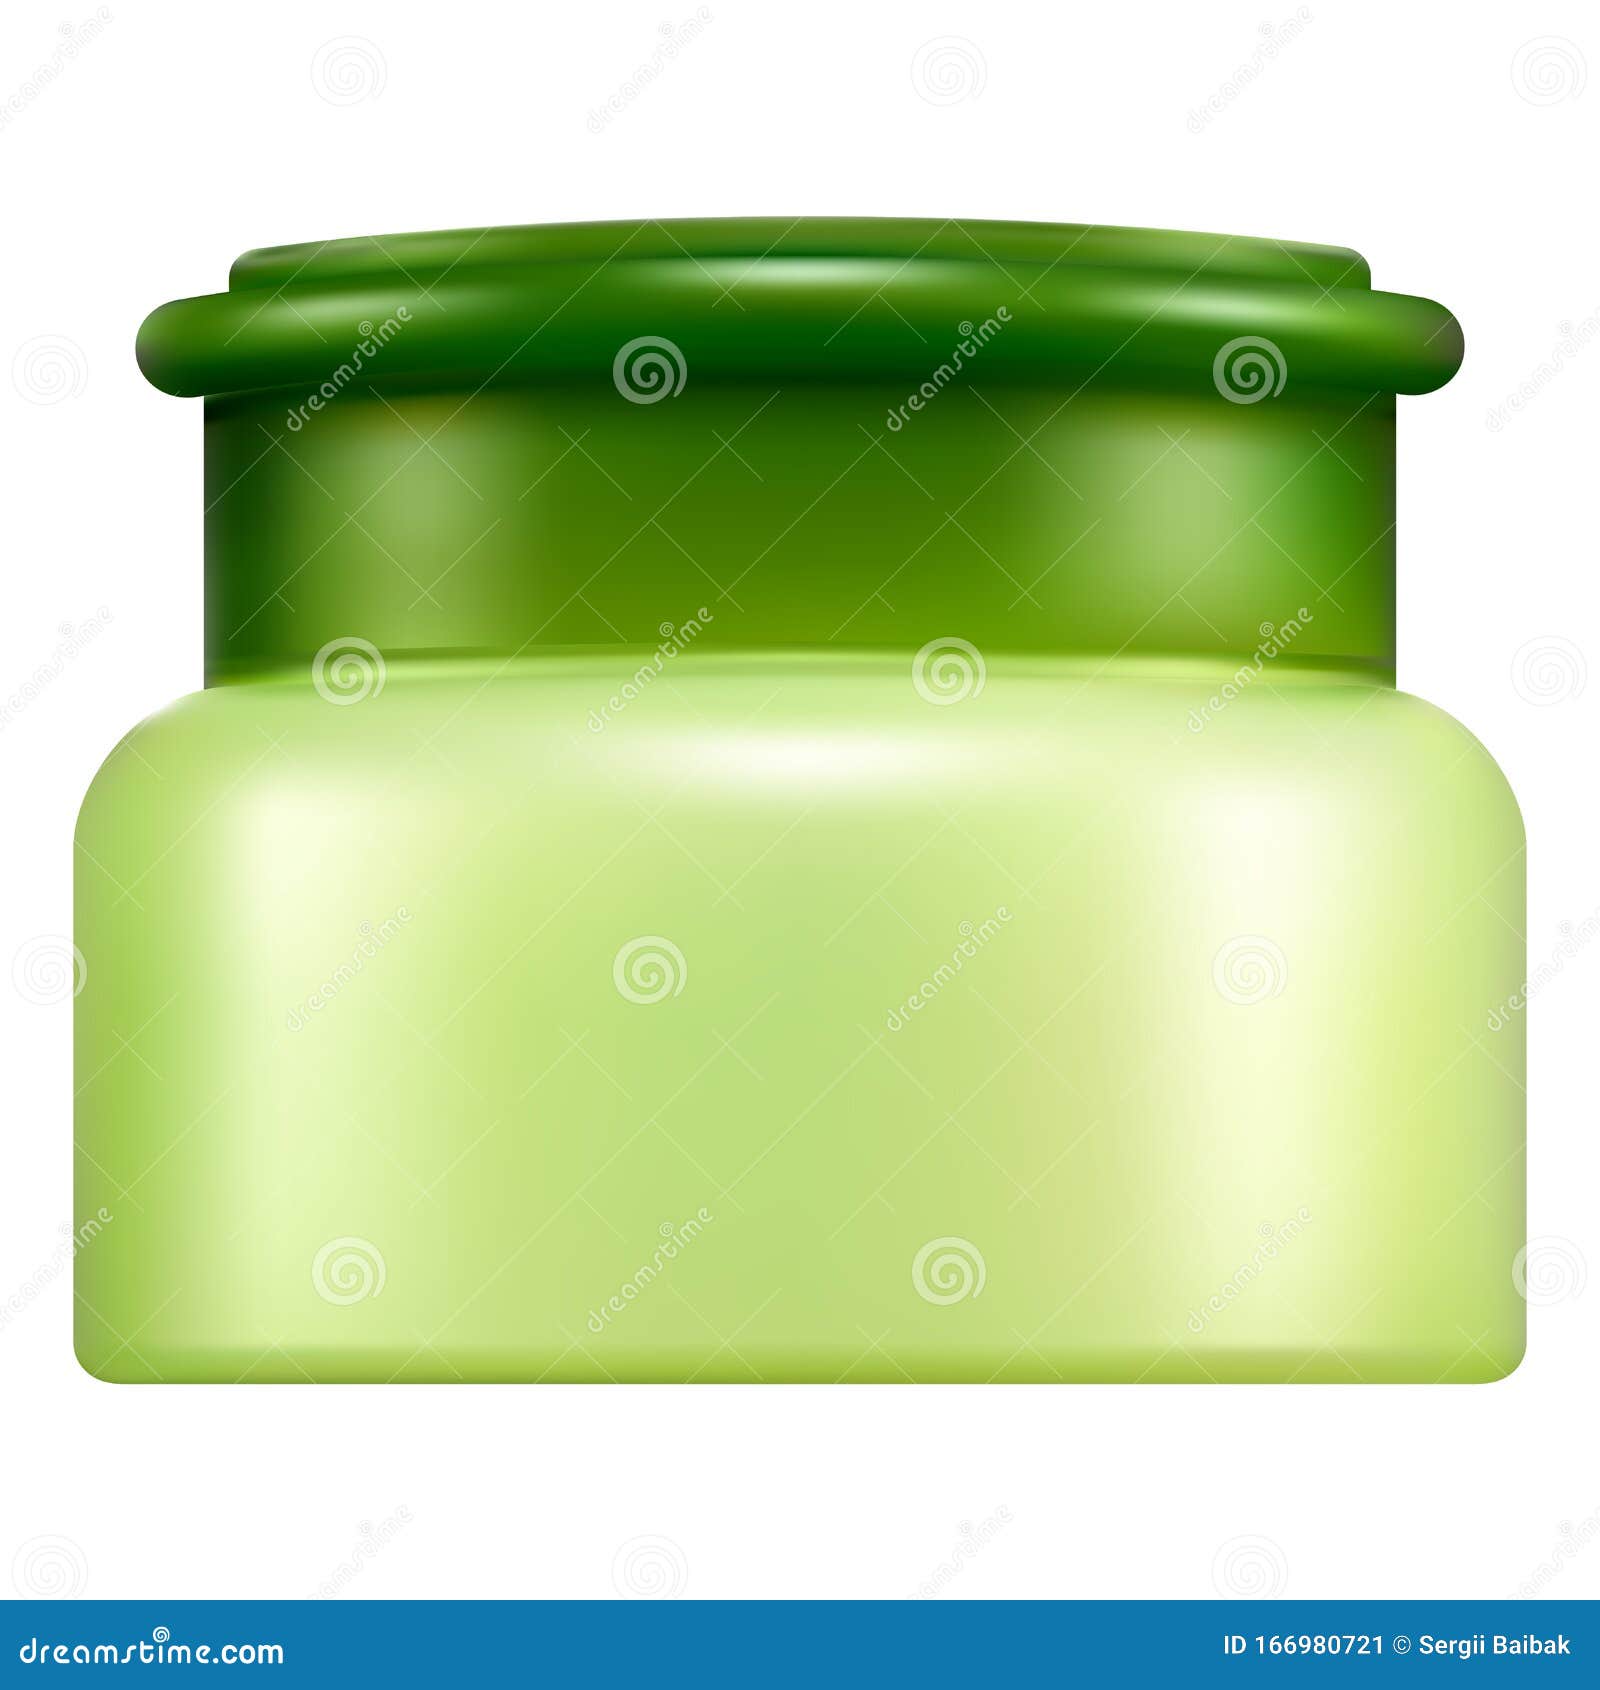 Download Realistic Cosmetic Jar Mockup. Packaging For Cream Stock Vector - Illustration of blank ...